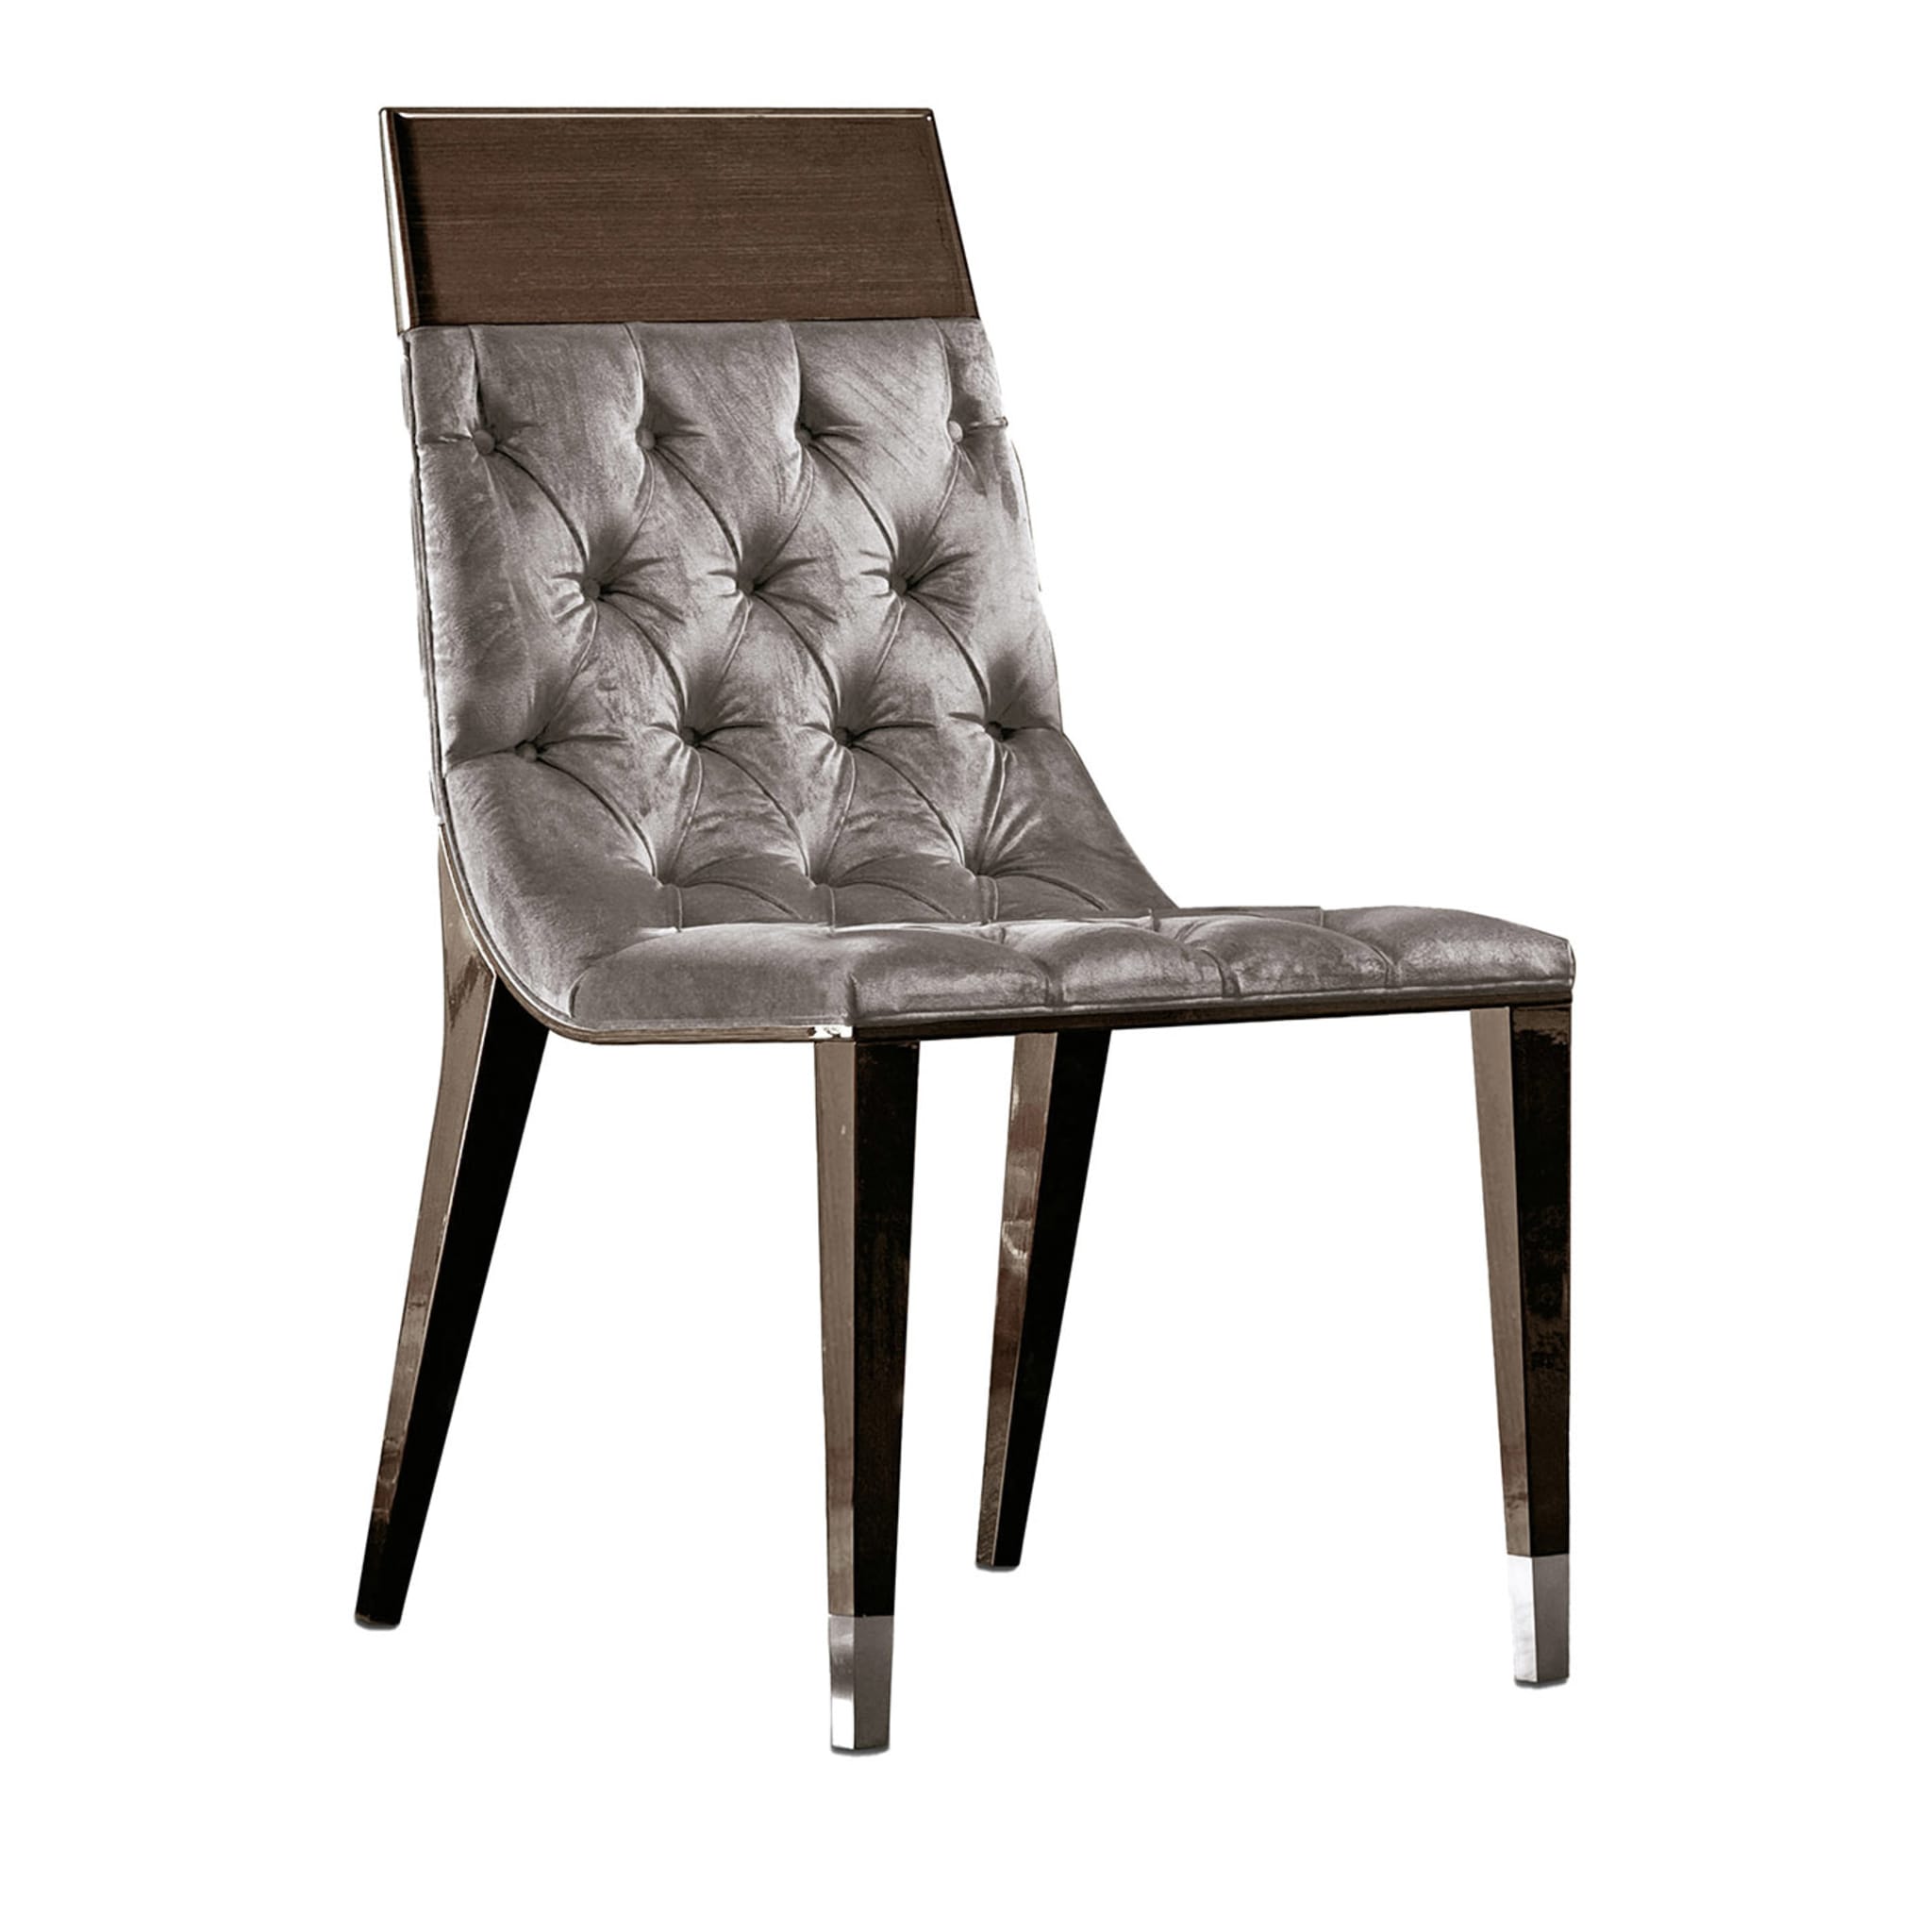 Absolute Tufted Gray & Brown fabric Chair - Main view